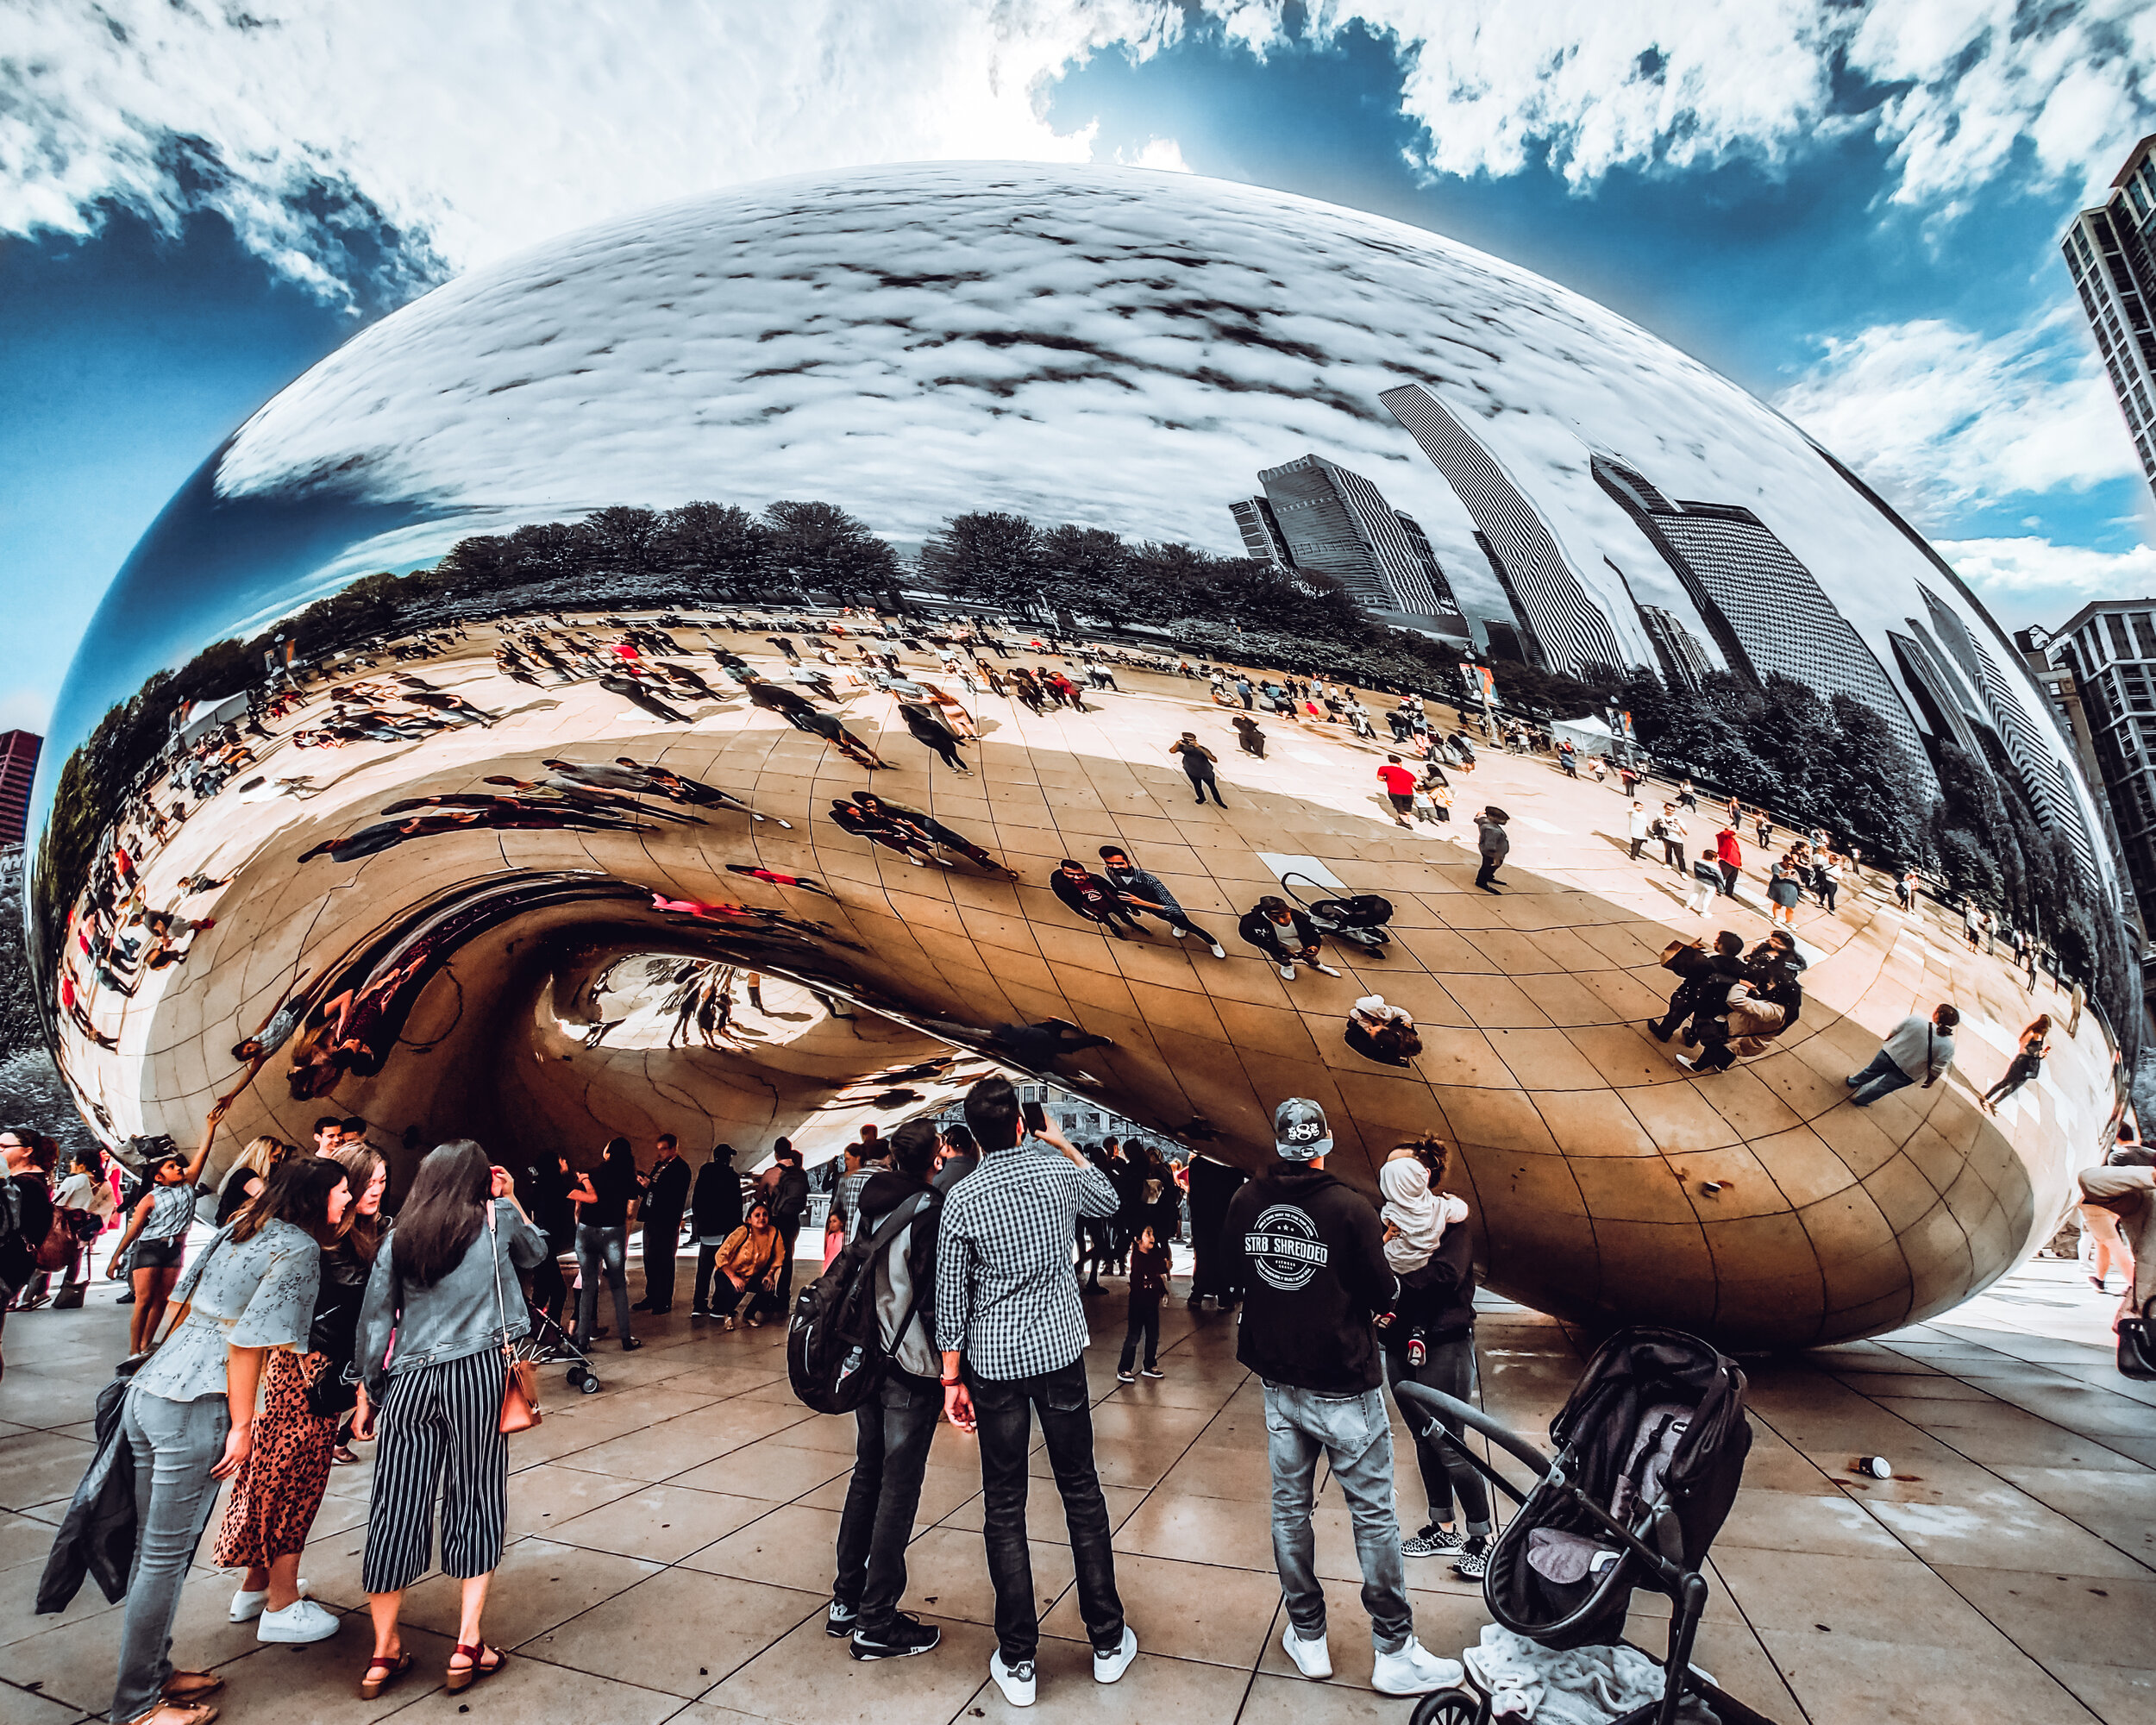 Experiencing Chicagos Arts and Culture